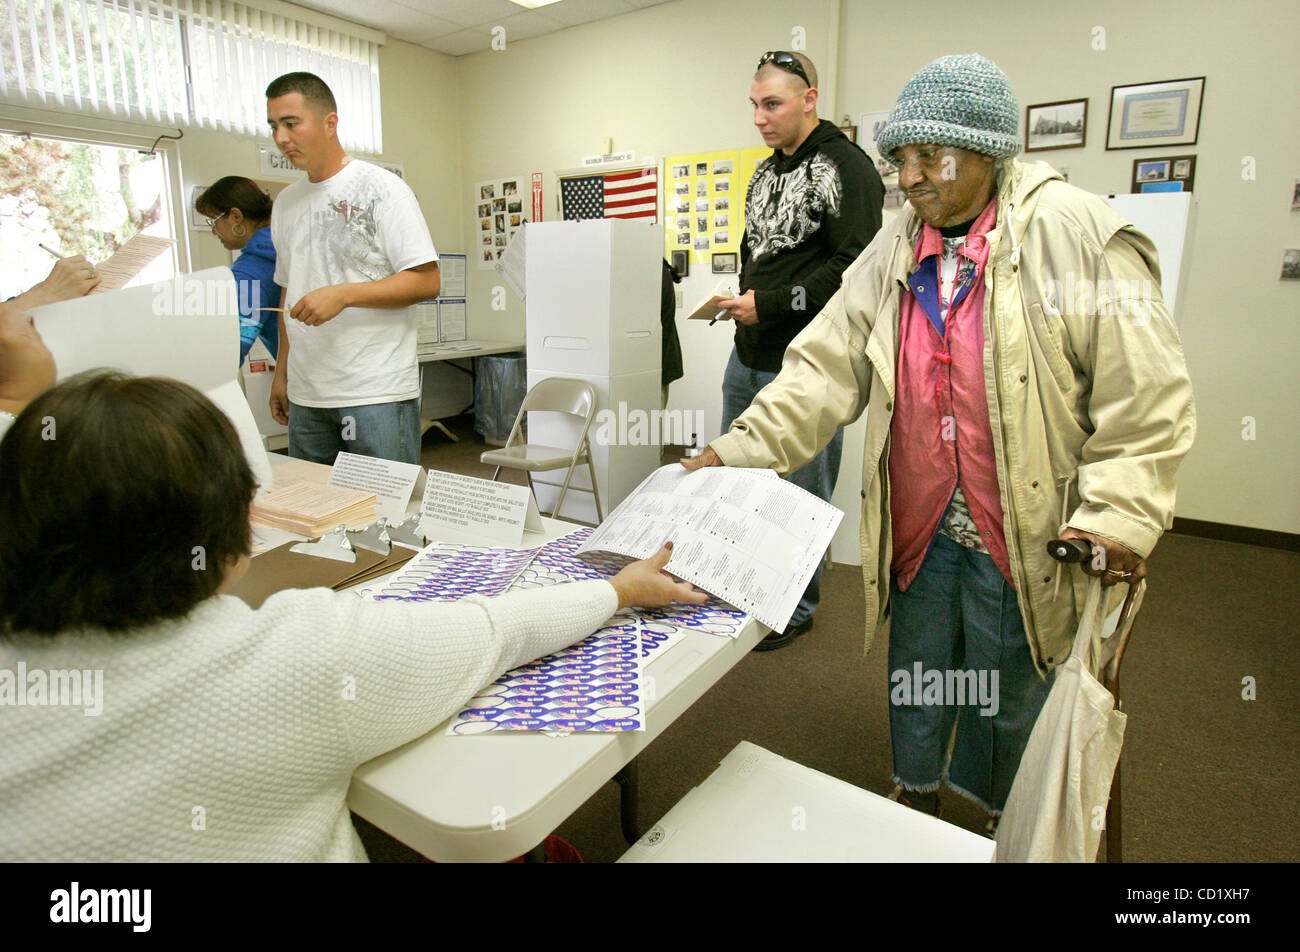 November 4 2008, Oceanside, CA, USA IDA LOWE, 79, hands her ballot to polling place worker PRECY JOVELLANOS (cq) after voting at the Chavez Resource Center in Oceanside's Joe Balderrama Park Credit: photo by Charlie Neuman, San Diego Union-Tribune/Zuma Press. copyright 2008 San Diego Union-Tribune Stock Photo